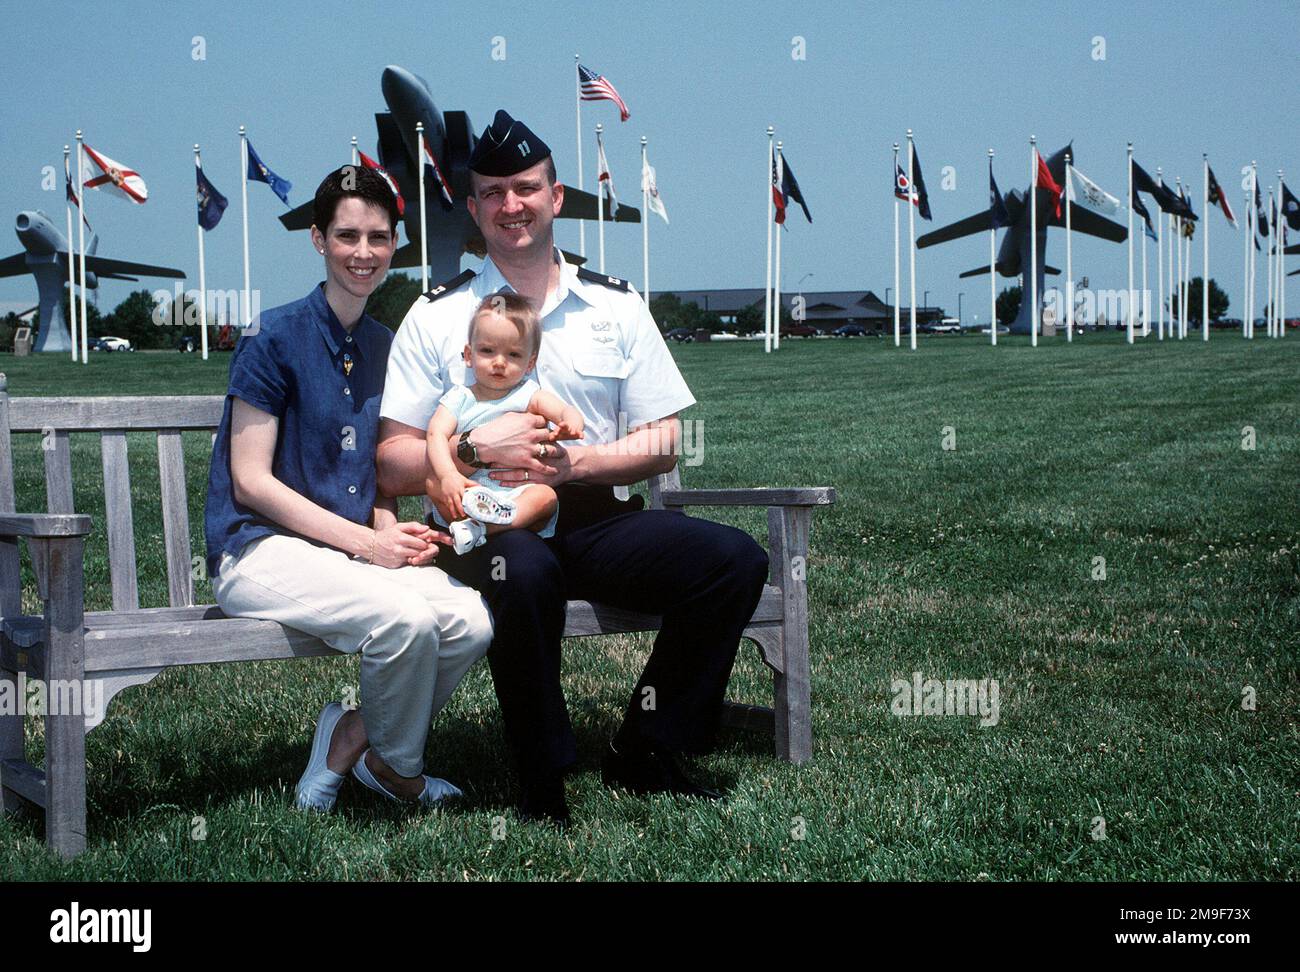 US Air Force Captain Dale Reed, his wife Kerri and their 11-month-old son Andrew pose for a photo at Langley AFB, VA. Kerri was diagnosed with cancer just three months before Andrew was borne. From AIRMAN Magazine, Aug 2000 Article 'Kerri's Hope'. US Air Force Captain Dale Reed, his wife Kerri and their 11-month-old son Andrew pose for a photo at Langley AFB, VA. Kerri was diagnosed with cancer just three months before Andrew was borne. From Airman Magazine, Aug 2000 Article 'Kerri's Hope'. Stock Photo